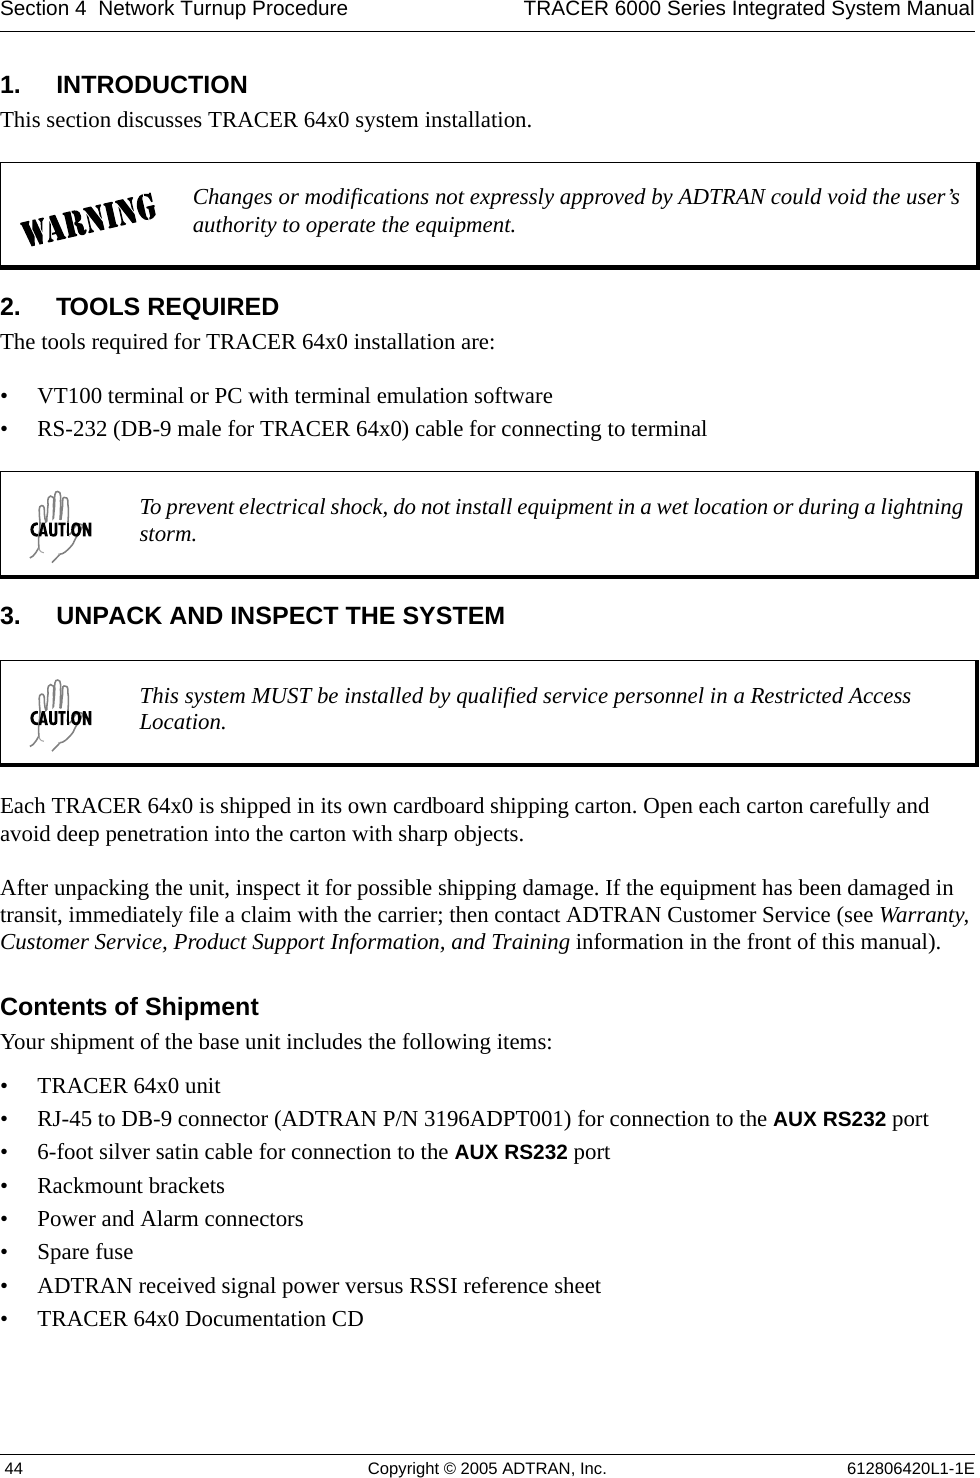 Section 4  Network Turnup Procedure TRACER 6000 Series Integrated System Manual 44 Copyright © 2005 ADTRAN, Inc. 612806420L1-1E1. INTRODUCTIONThis section discusses TRACER 64x0 system installation.2. TOOLS REQUIREDThe tools required for TRACER 64x0 installation are:• VT100 terminal or PC with terminal emulation software• RS-232 (DB-9 male for TRACER 64x0) cable for connecting to terminal3. UNPACK AND INSPECT THE SYSTEMEach TRACER 64x0 is shipped in its own cardboard shipping carton. Open each carton carefully and avoid deep penetration into the carton with sharp objects. After unpacking the unit, inspect it for possible shipping damage. If the equipment has been damaged in transit, immediately file a claim with the carrier; then contact ADTRAN Customer Service (see Warranty, Customer Service, Product Support Information, and Training information in the front of this manual).Contents of ShipmentYour shipment of the base unit includes the following items:• TRACER 64x0 unit• RJ-45 to DB-9 connector (ADTRAN P/N 3196ADPT001) for connection to the AUX RS232 port• 6-foot silver satin cable for connection to the AUX RS232 port• Rackmount brackets• Power and Alarm connectors• Spare fuse• ADTRAN received signal power versus RSSI reference sheet• TRACER 64x0 Documentation CDChanges or modifications not expressly approved by ADTRAN could void the user’s authority to operate the equipment.To prevent electrical shock, do not install equipment in a wet location or during a lightning storm.This system MUST be installed by qualified service personnel in a Restricted Access Location.